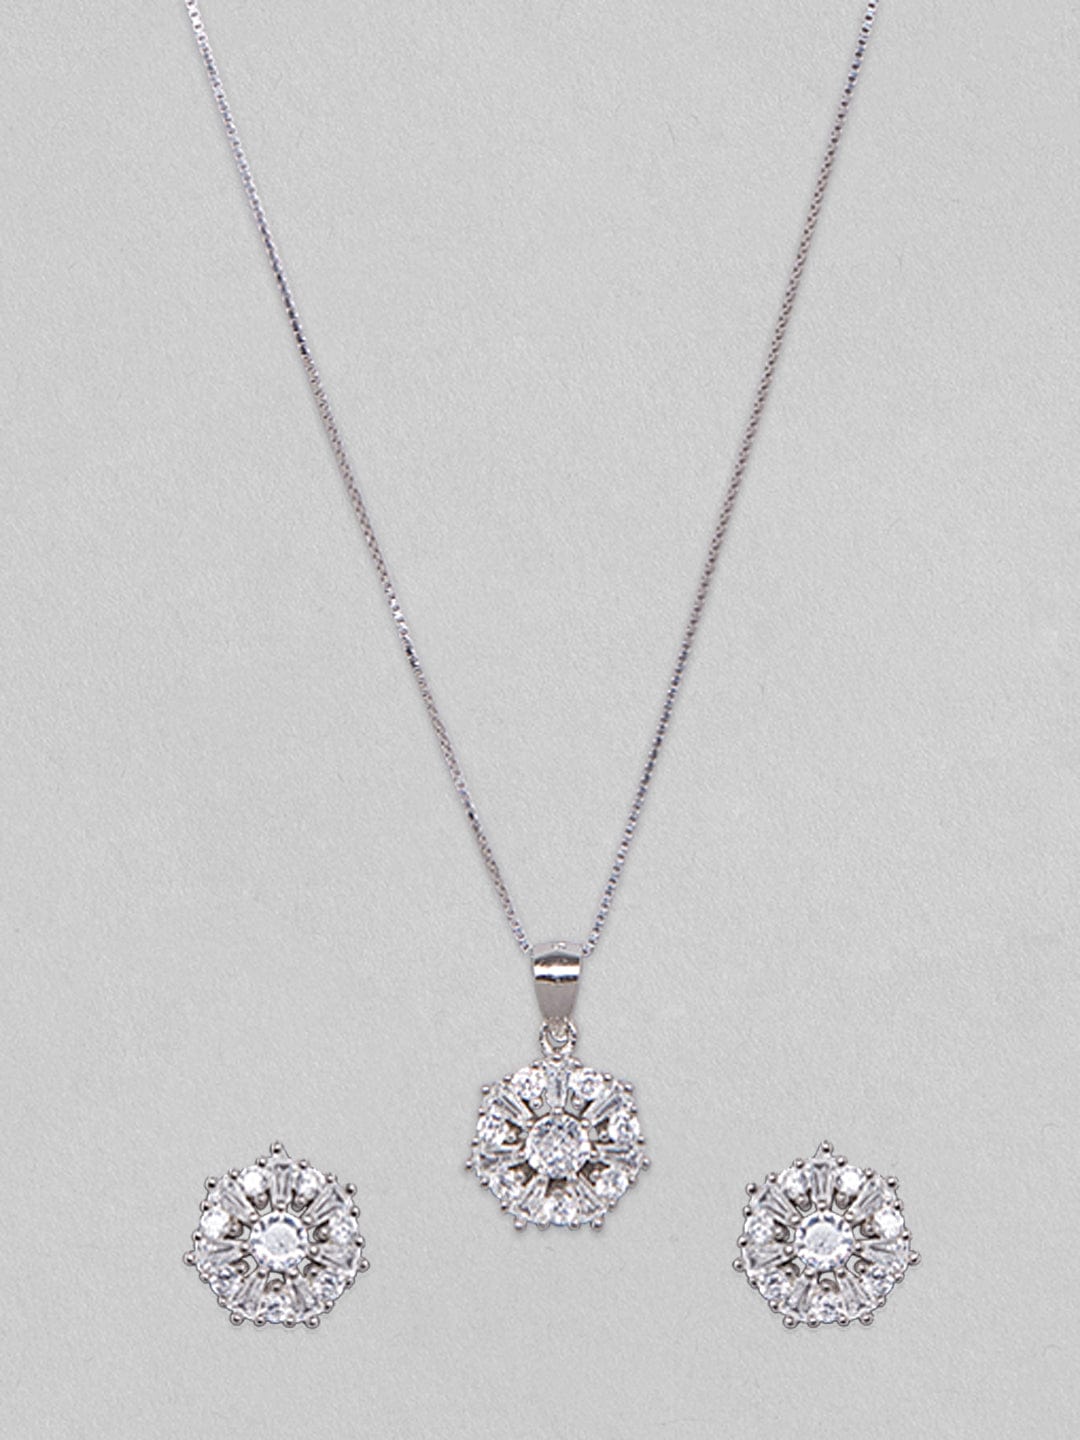 The Heptagon Of Zircons - Necklace Set Necklace Set